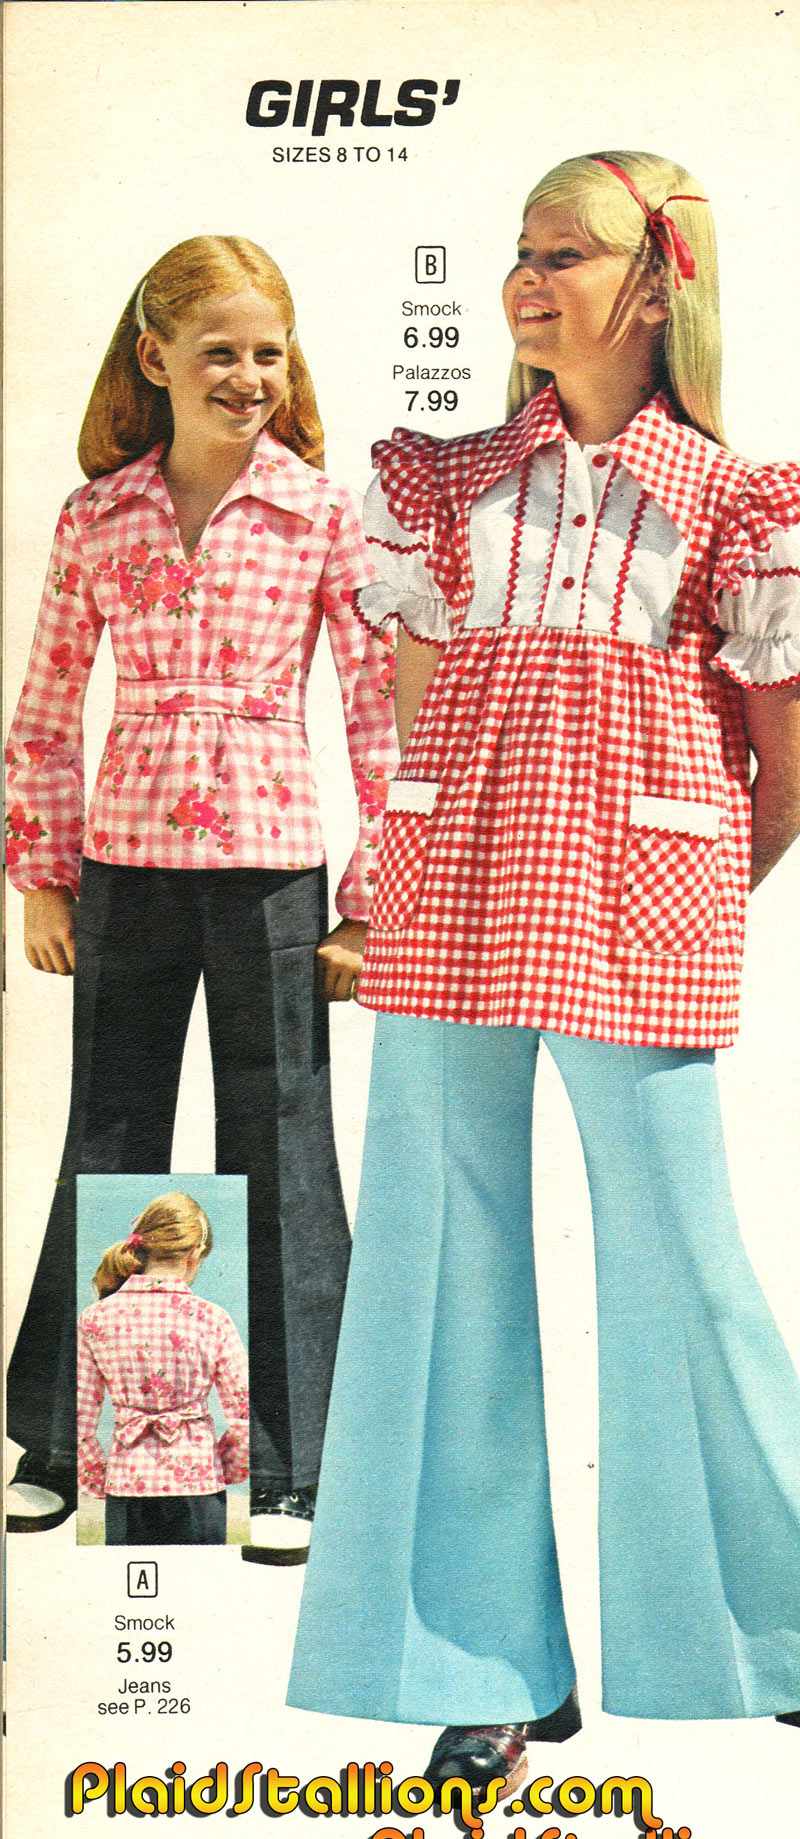 Back TO School fashions 1970s